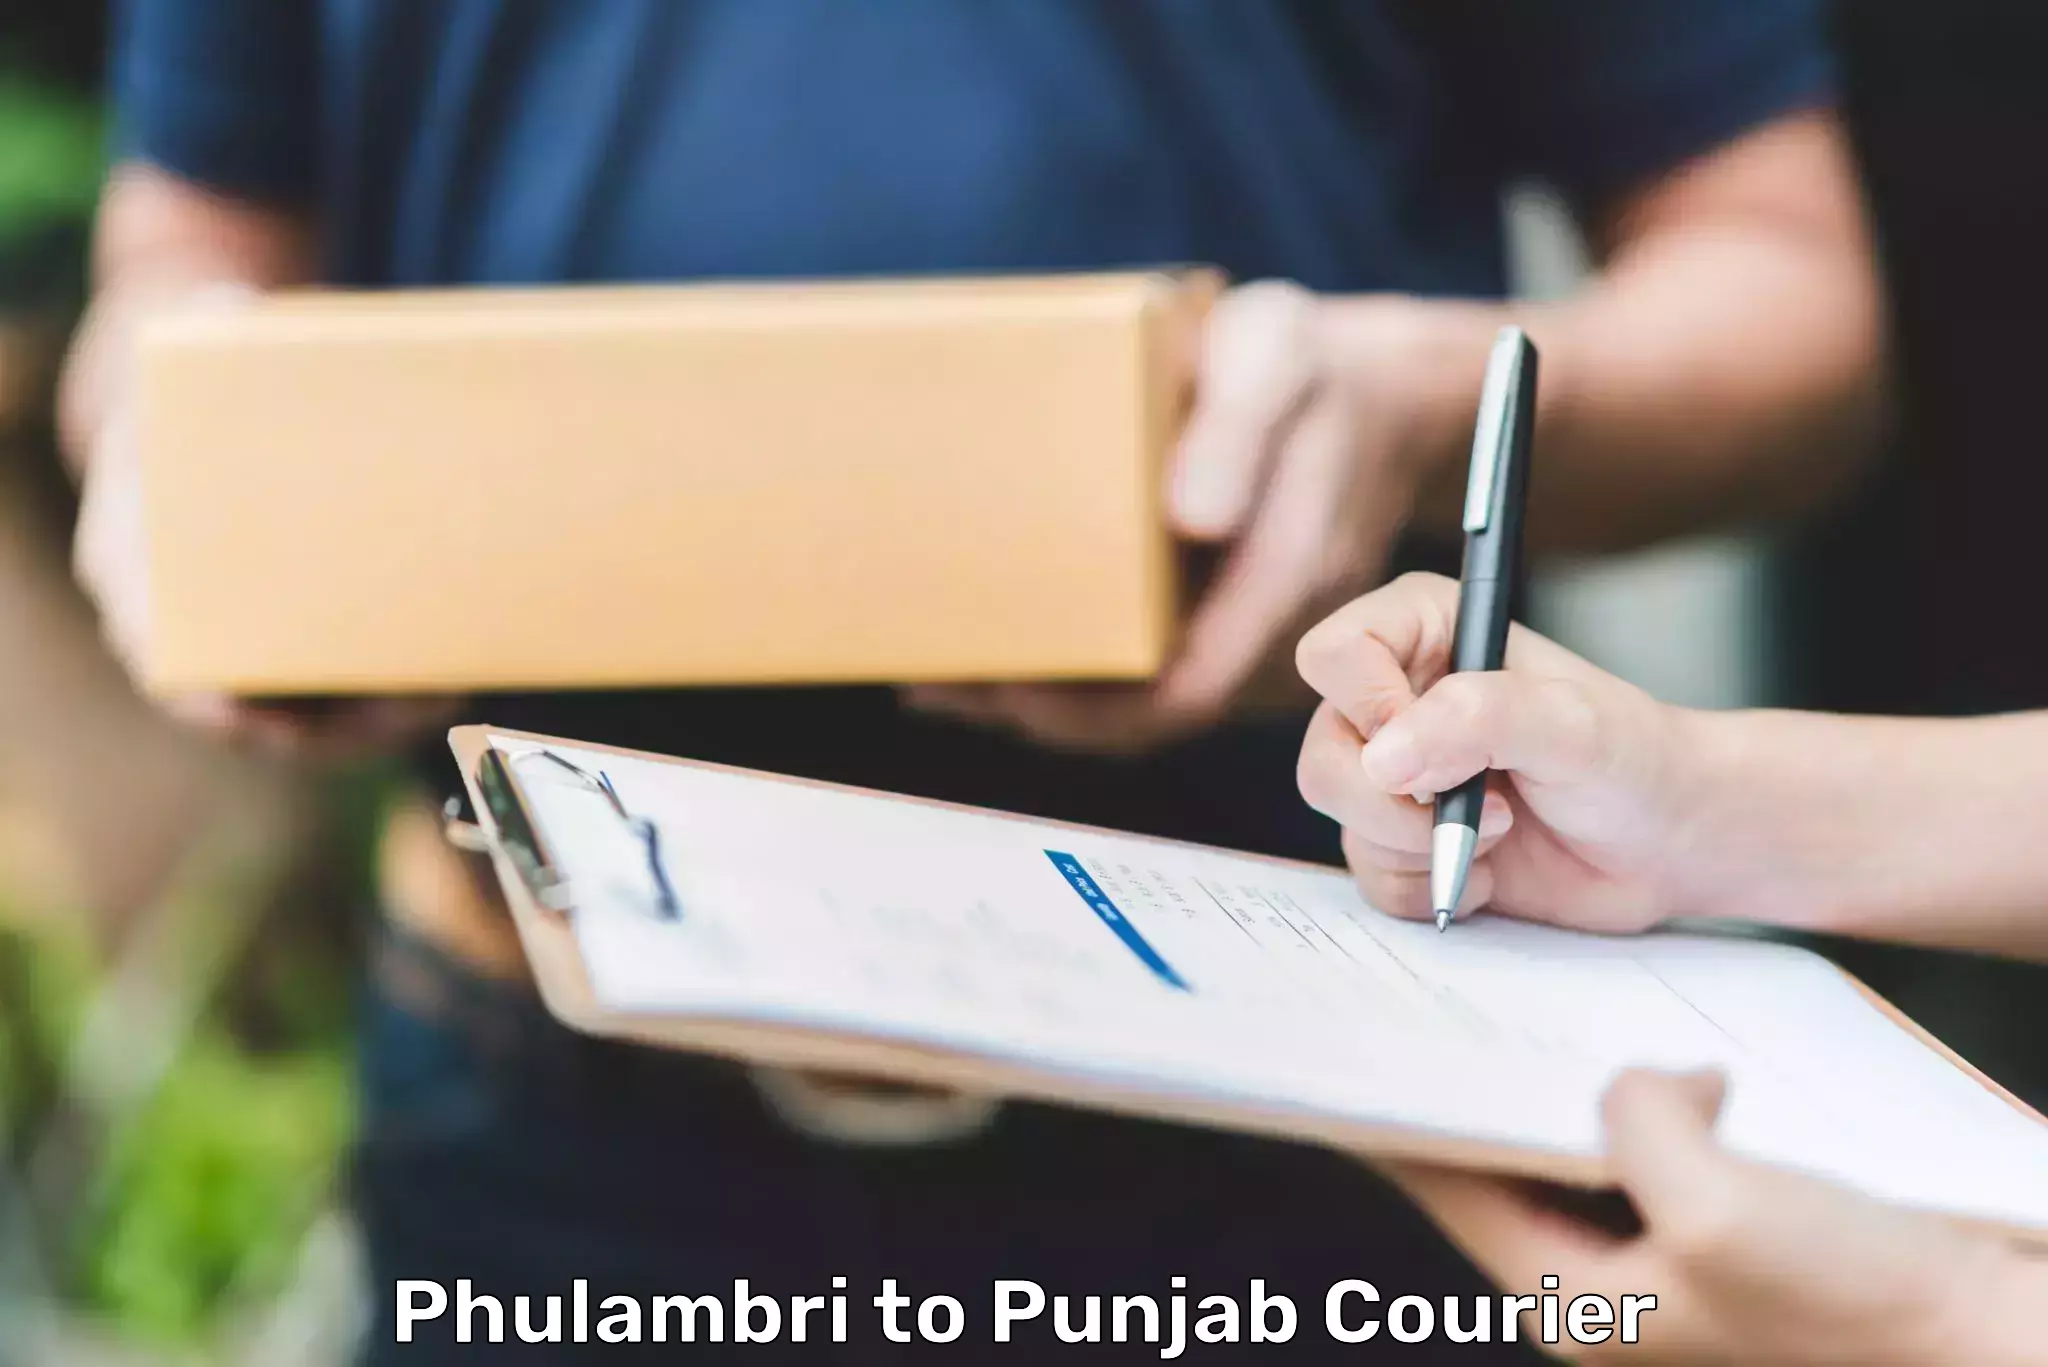 Remote area delivery in Phulambri to Punjab